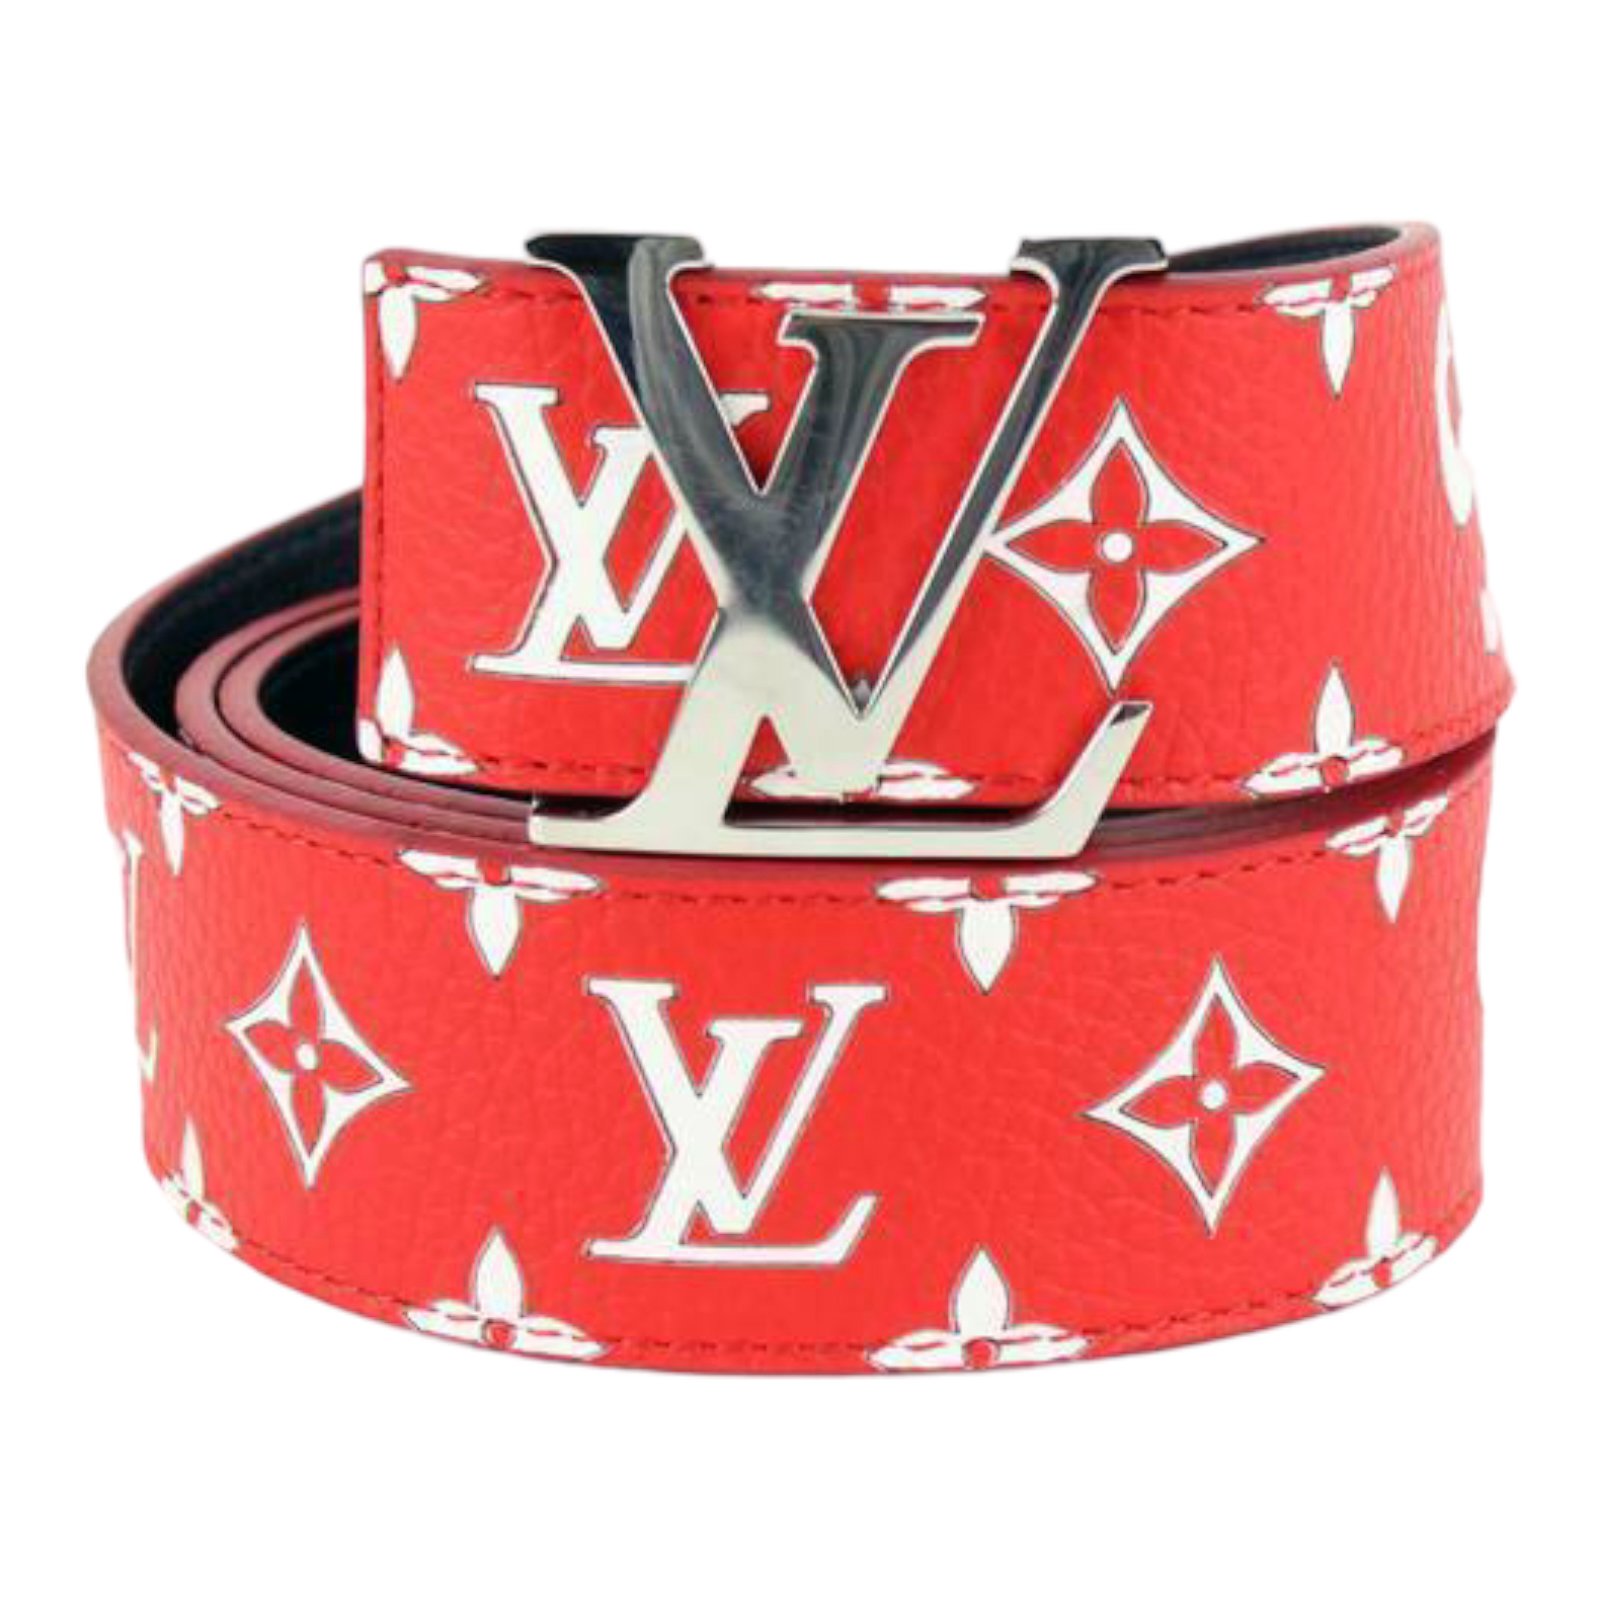 A Close Look at the Louis Vuitton x Supreme Red Initiales Belt